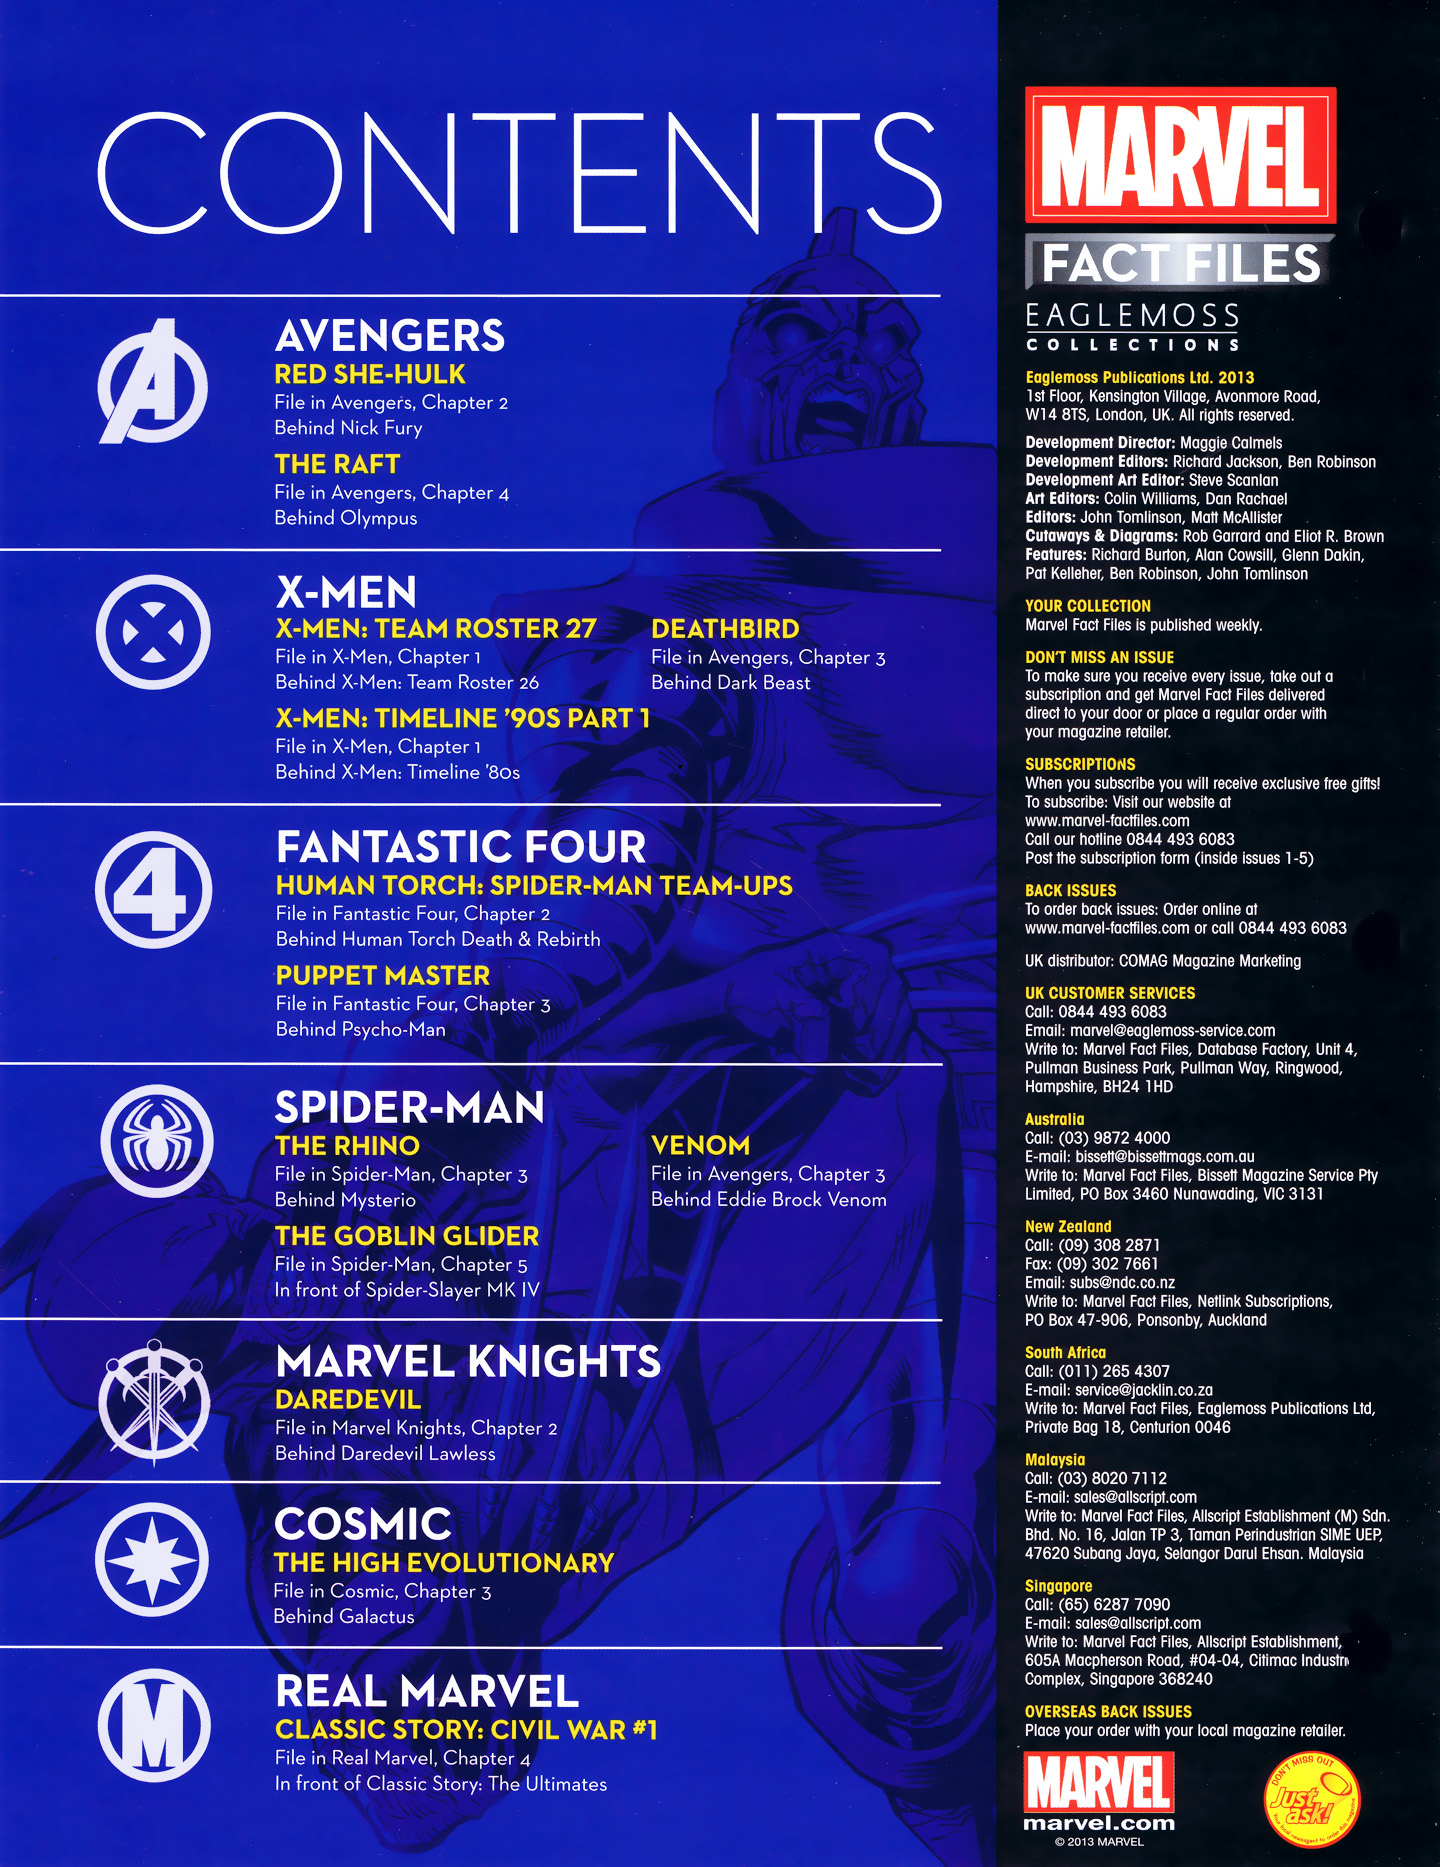 Read online Marvel Fact Files comic -  Issue #27 - 3